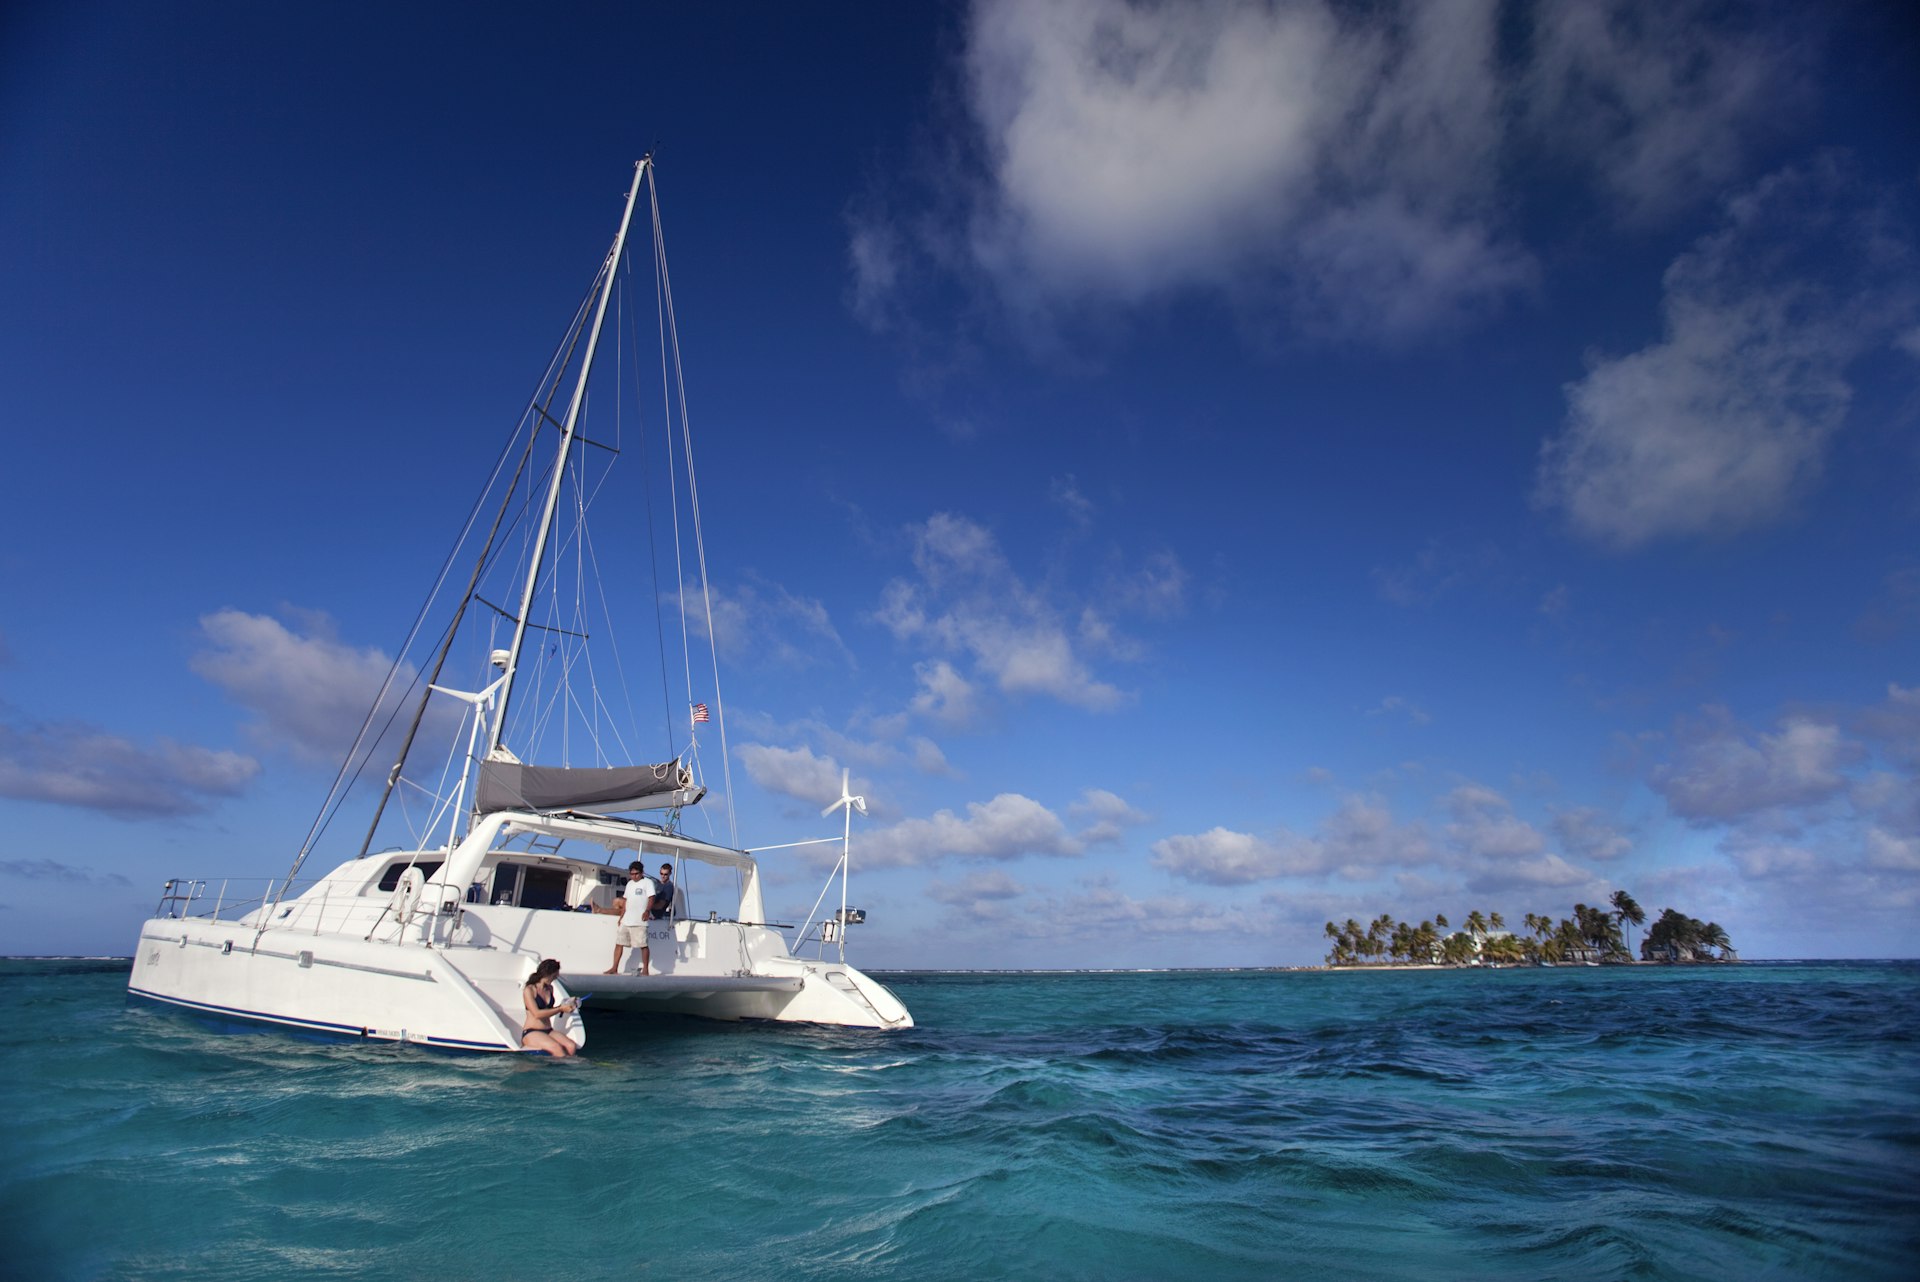 A catamaran is moored in the blue waters of Belize. There is a woman sitting on the edge of the boat. 